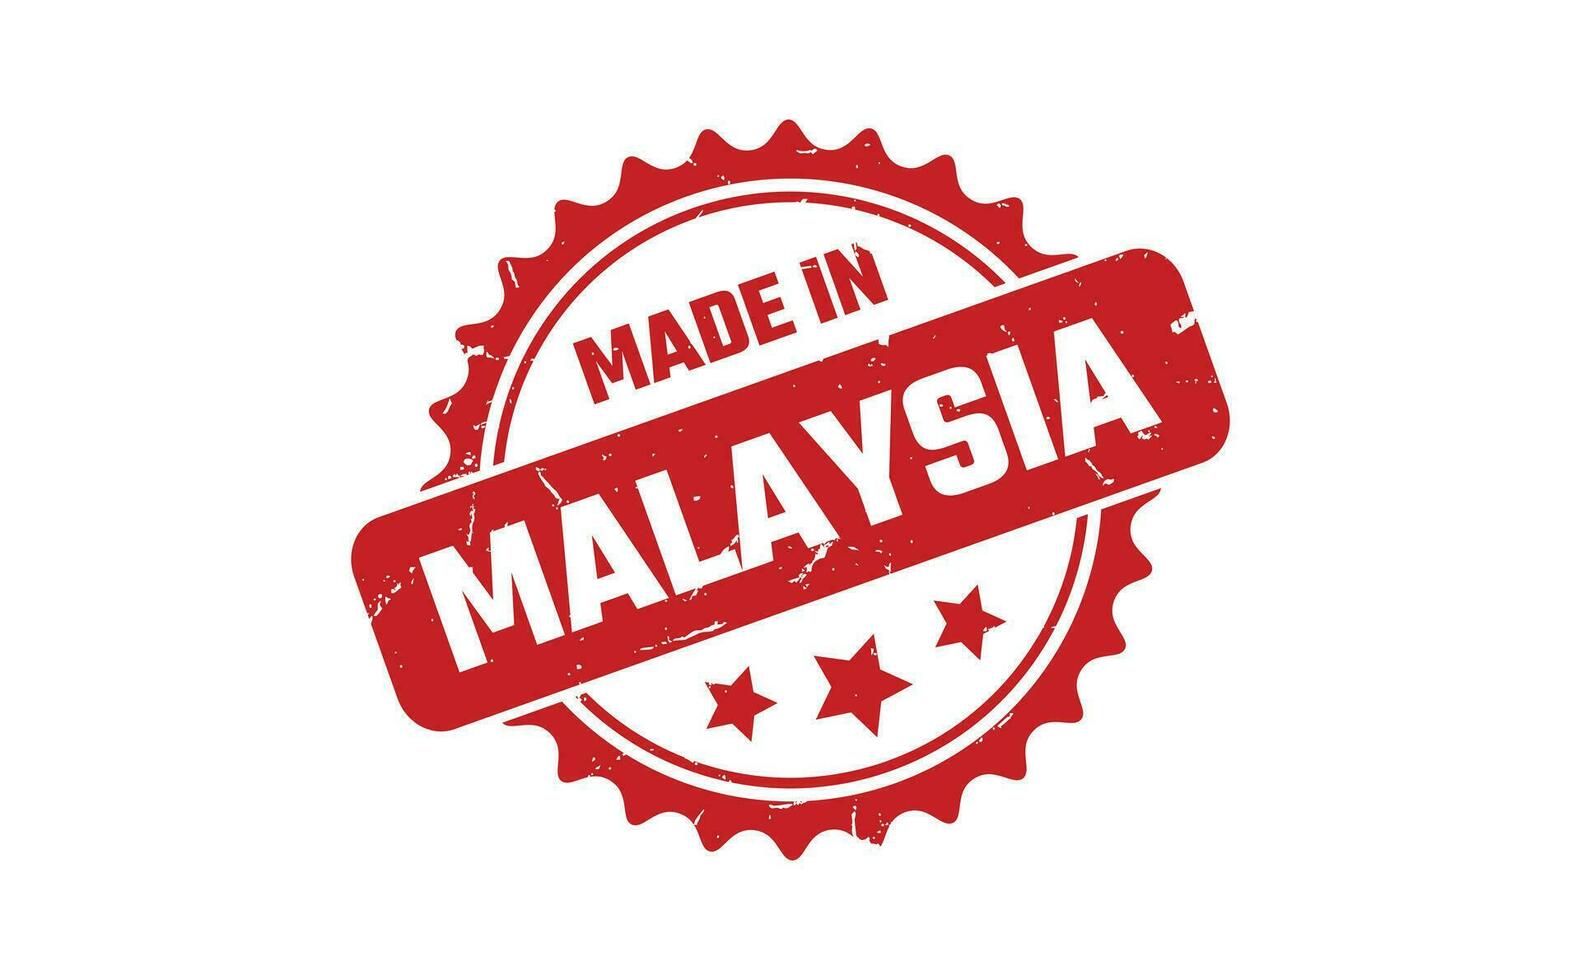 Made In Malaysia Rubber Stamp vector